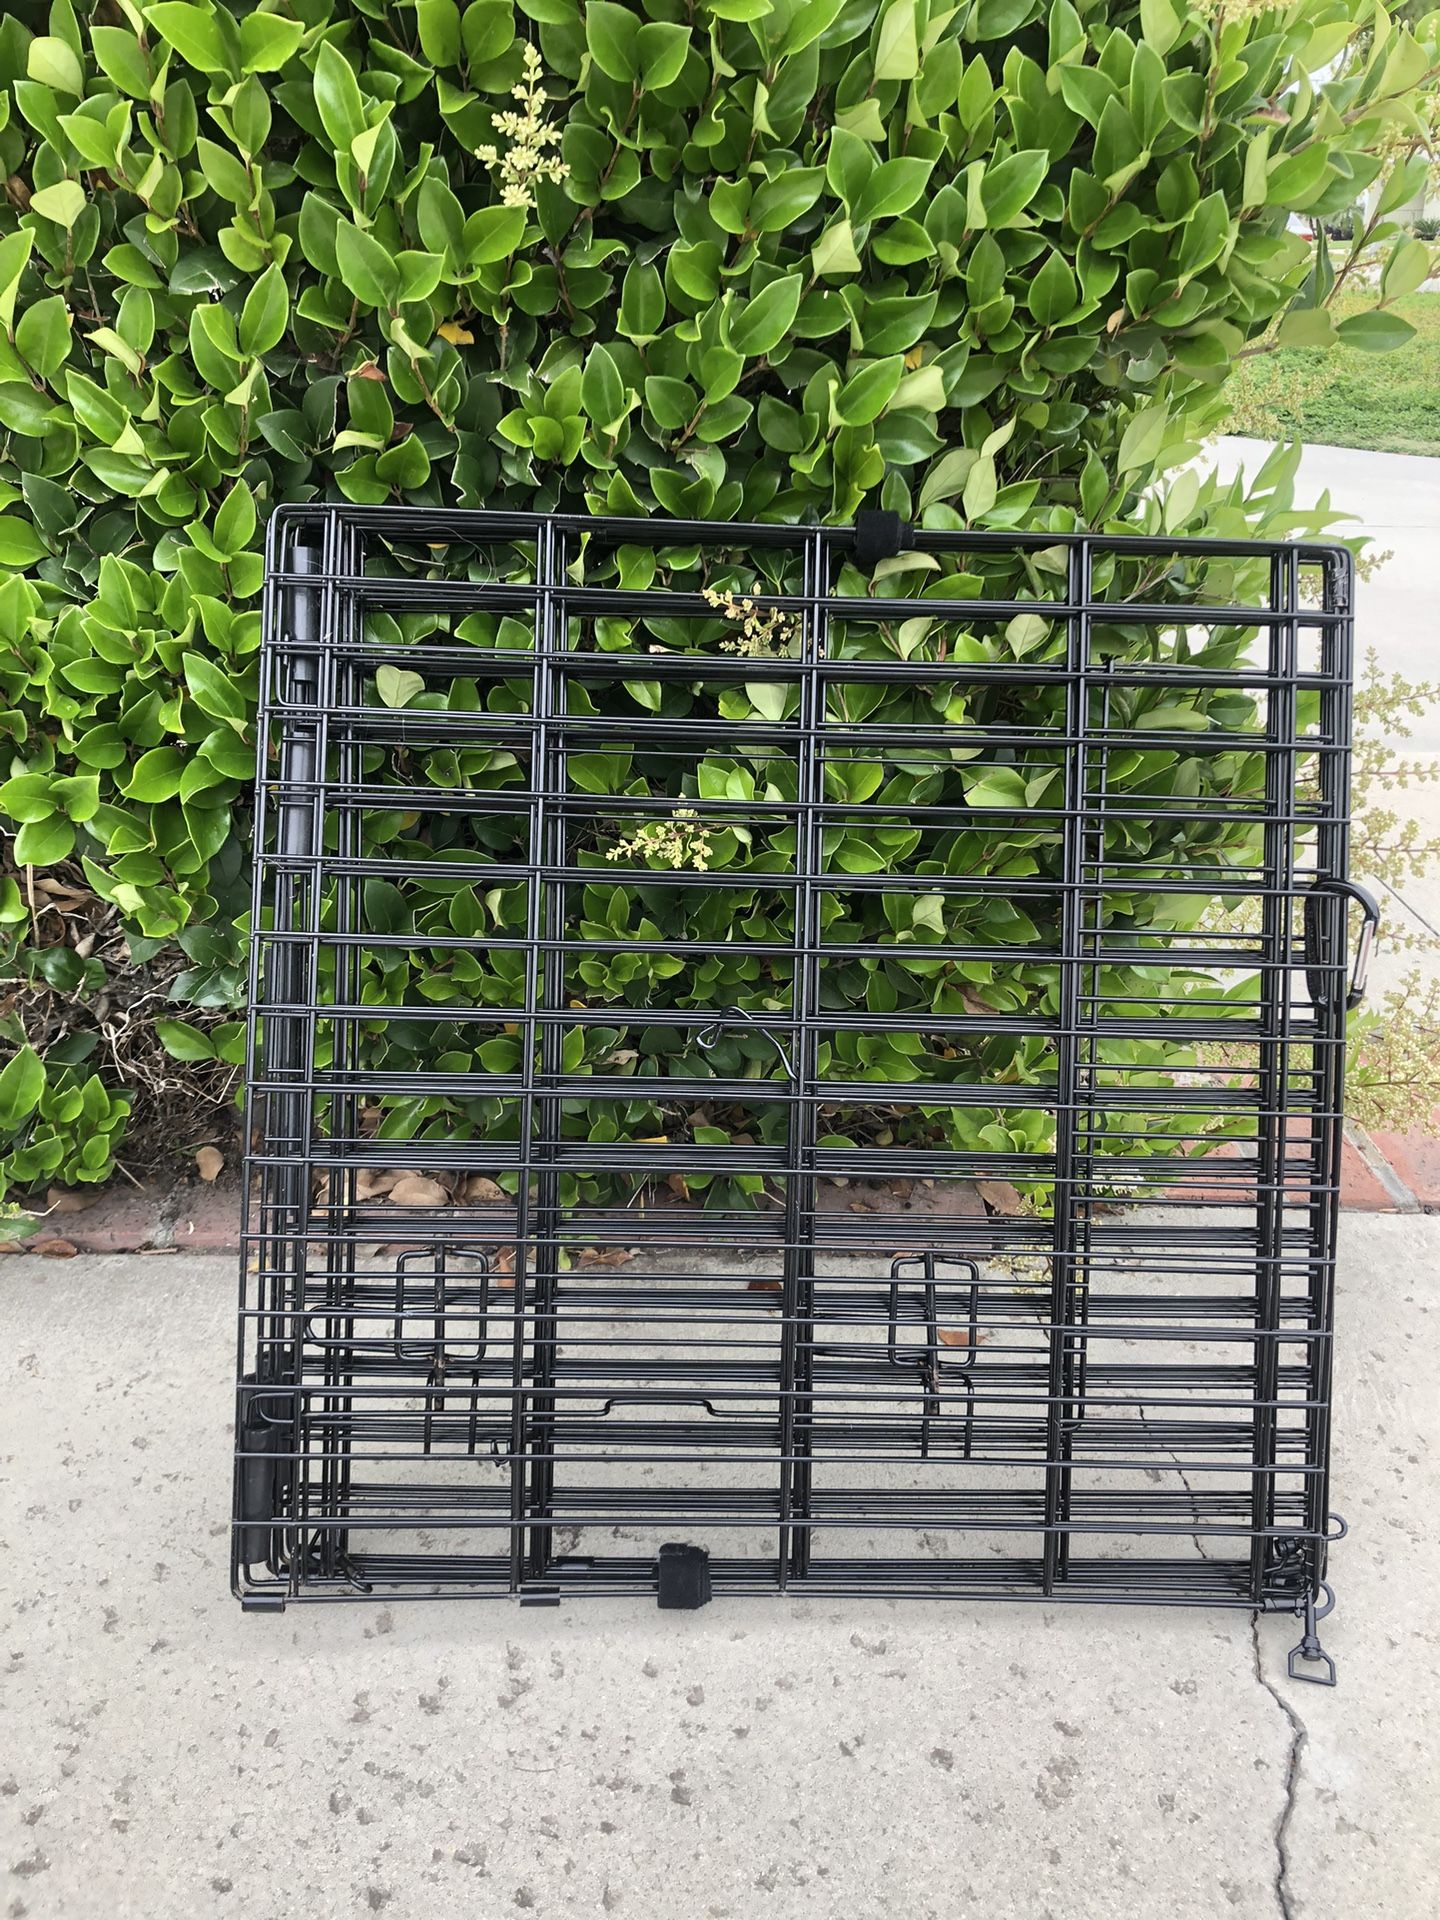 Small To Medium Size Animal Convertible Playpen And Crate